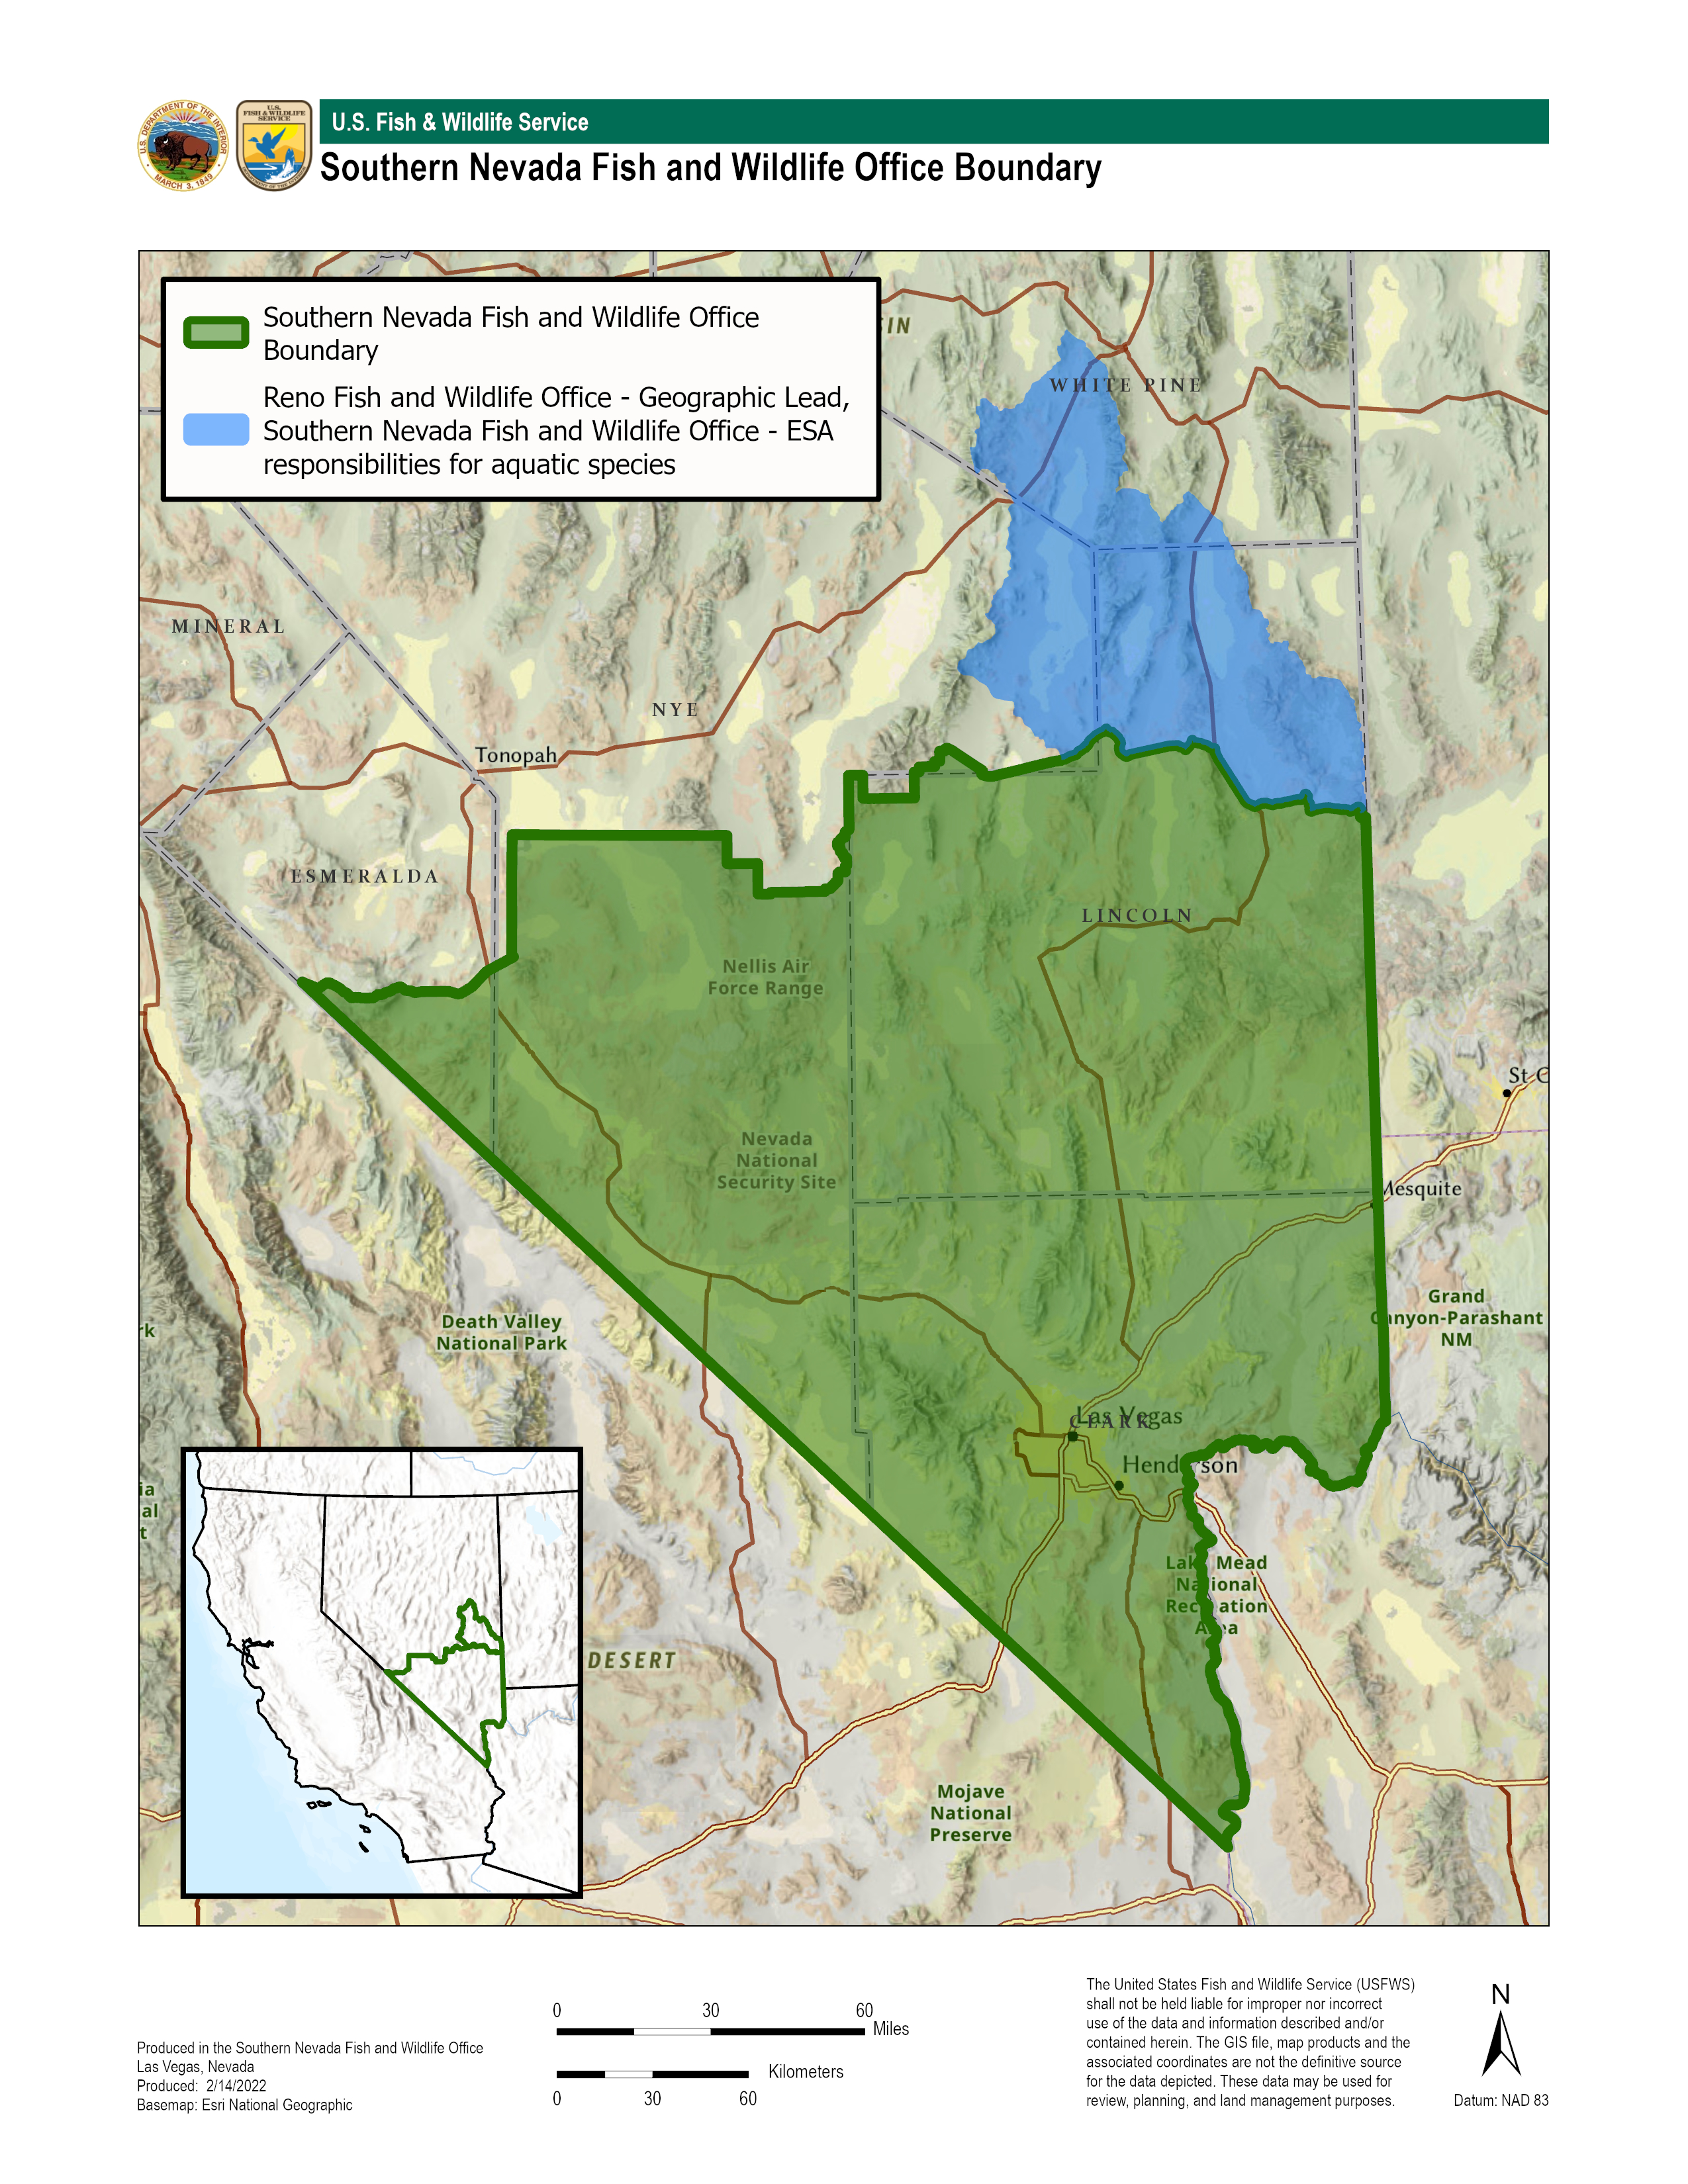 Map depicting area of southern Nevada covered by the Southern Nevada Fish and Wildlife Ofice